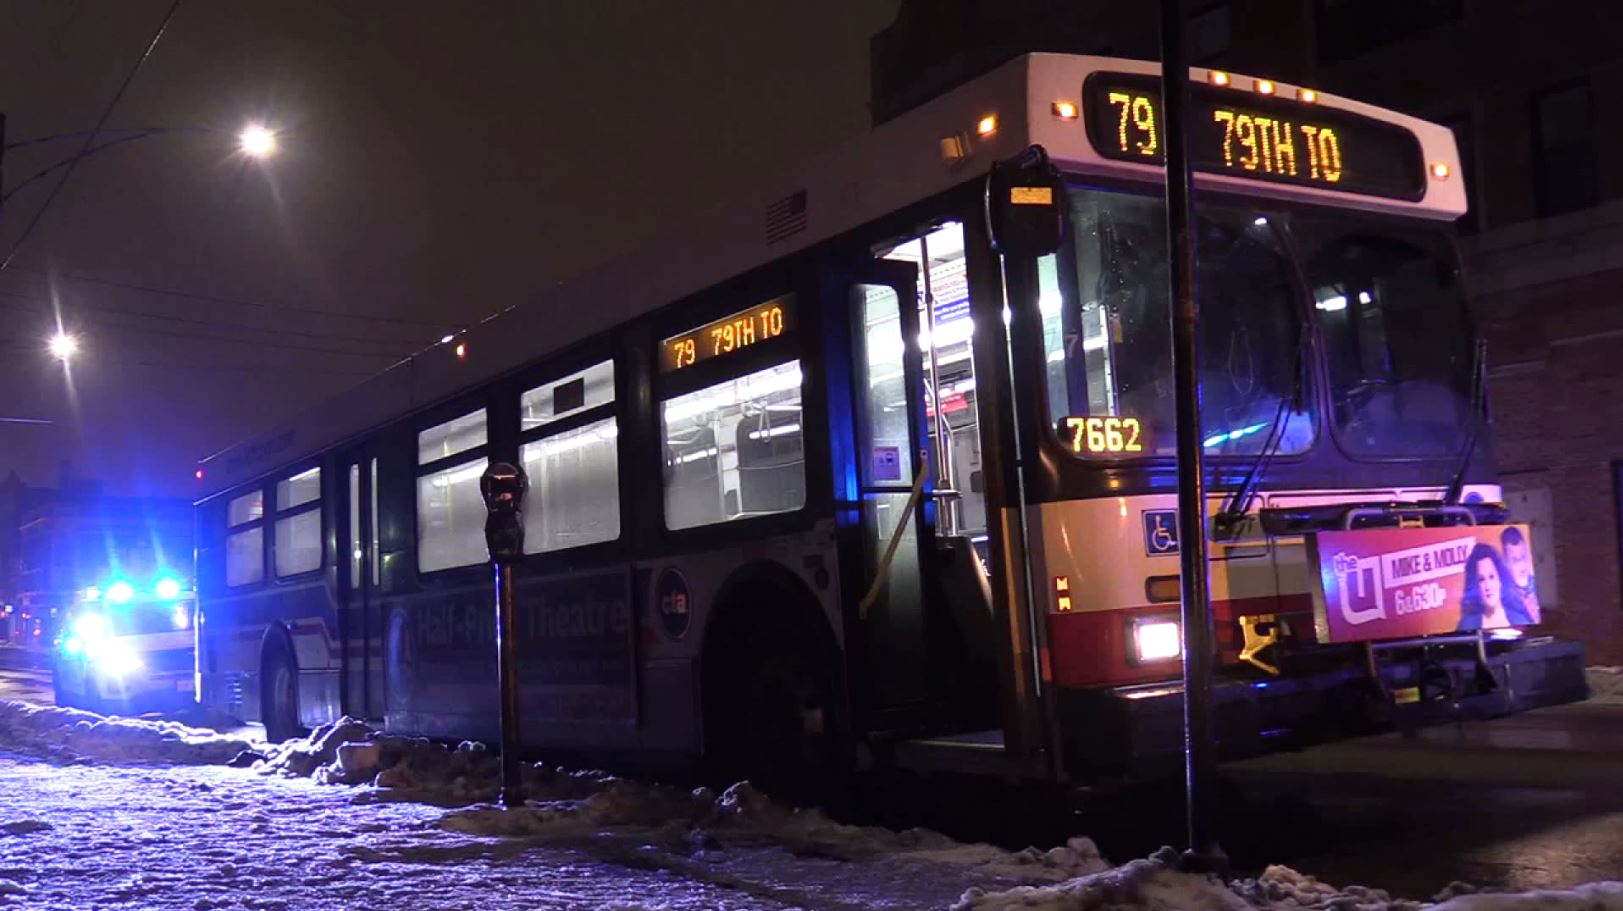 Driver Jumps Out Window After Shooting On Cta Bus Cbs Chicago